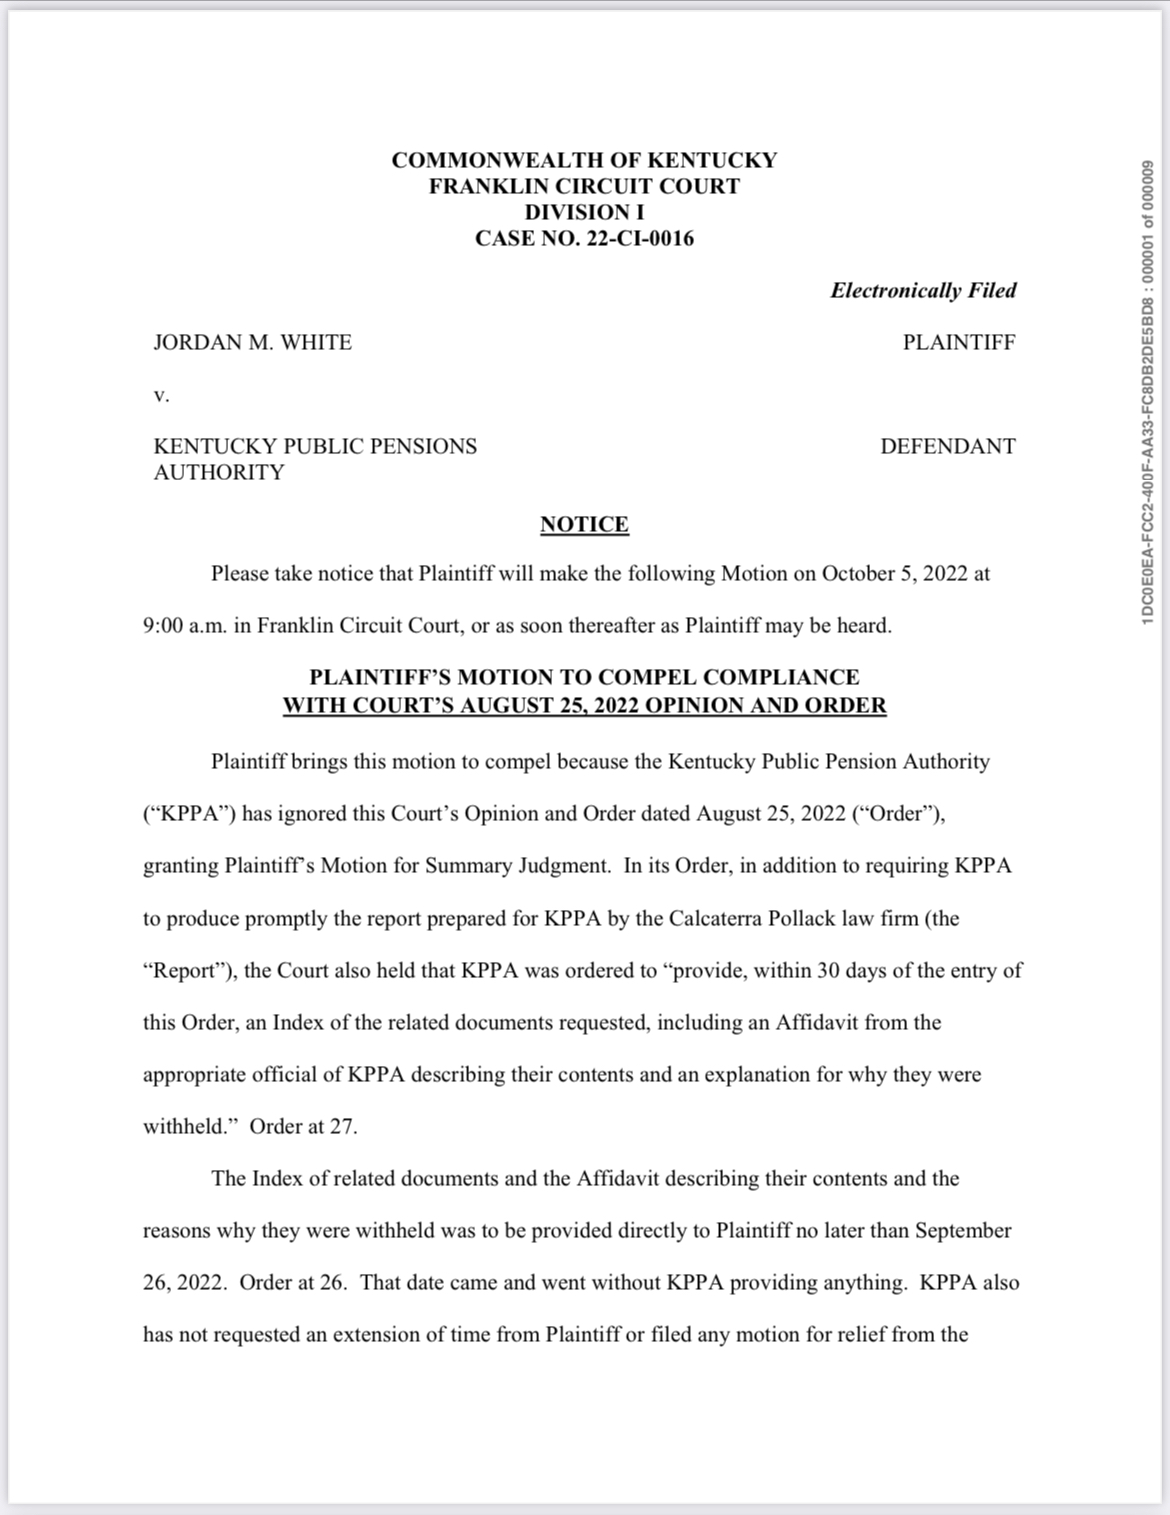 First page of Plaintiff Jordan White’s Motion to Compel